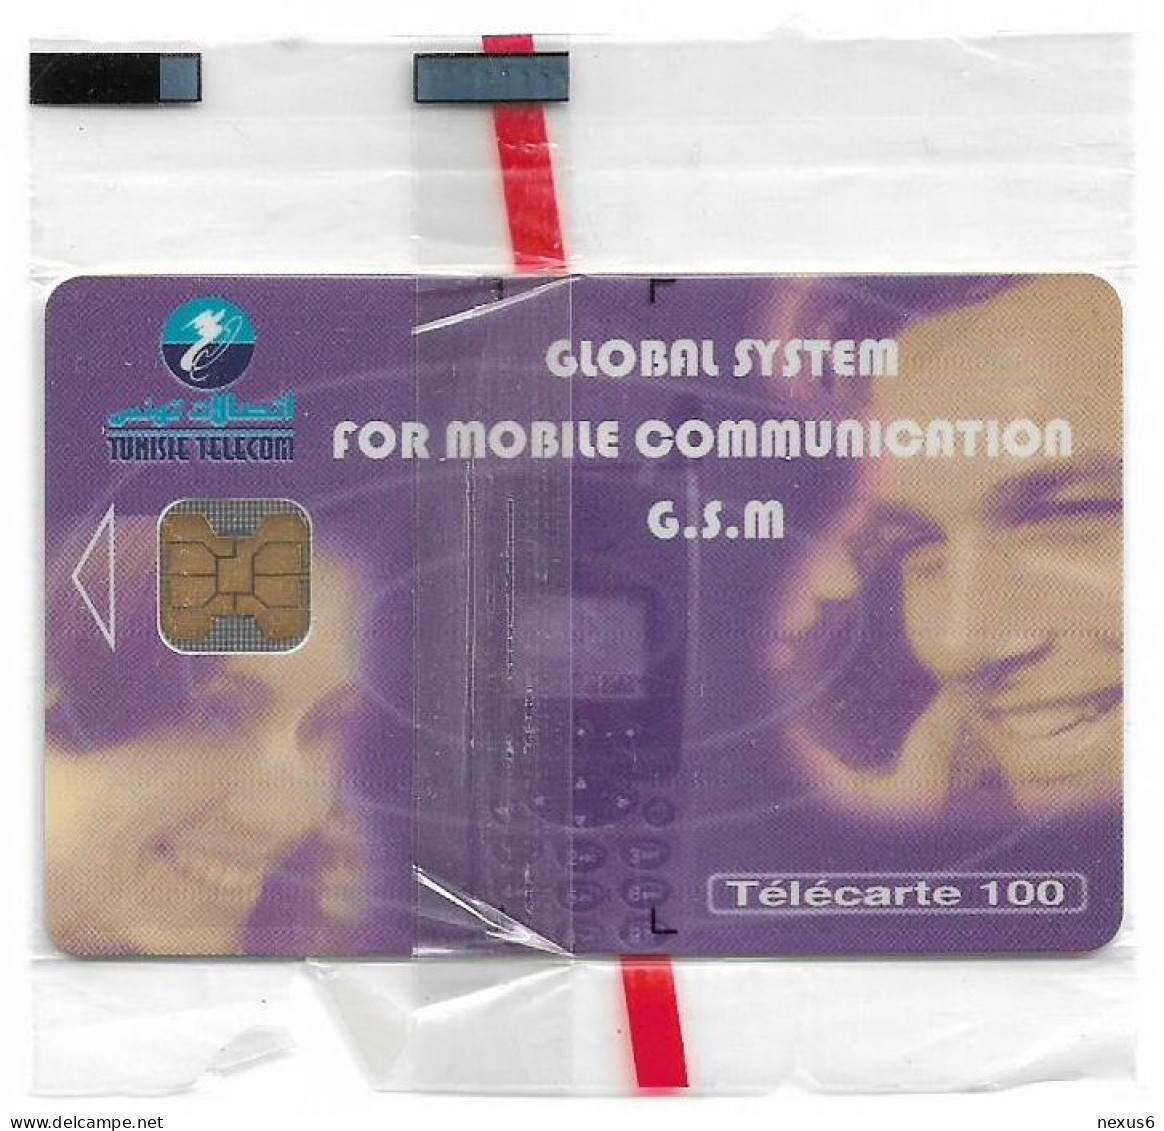 Tunisia - Tunisie Telecom - Global System For Mobile Comm., 100Units, Chip Oberthur, 01.2000, 30.000ex, NSB - Tunisie